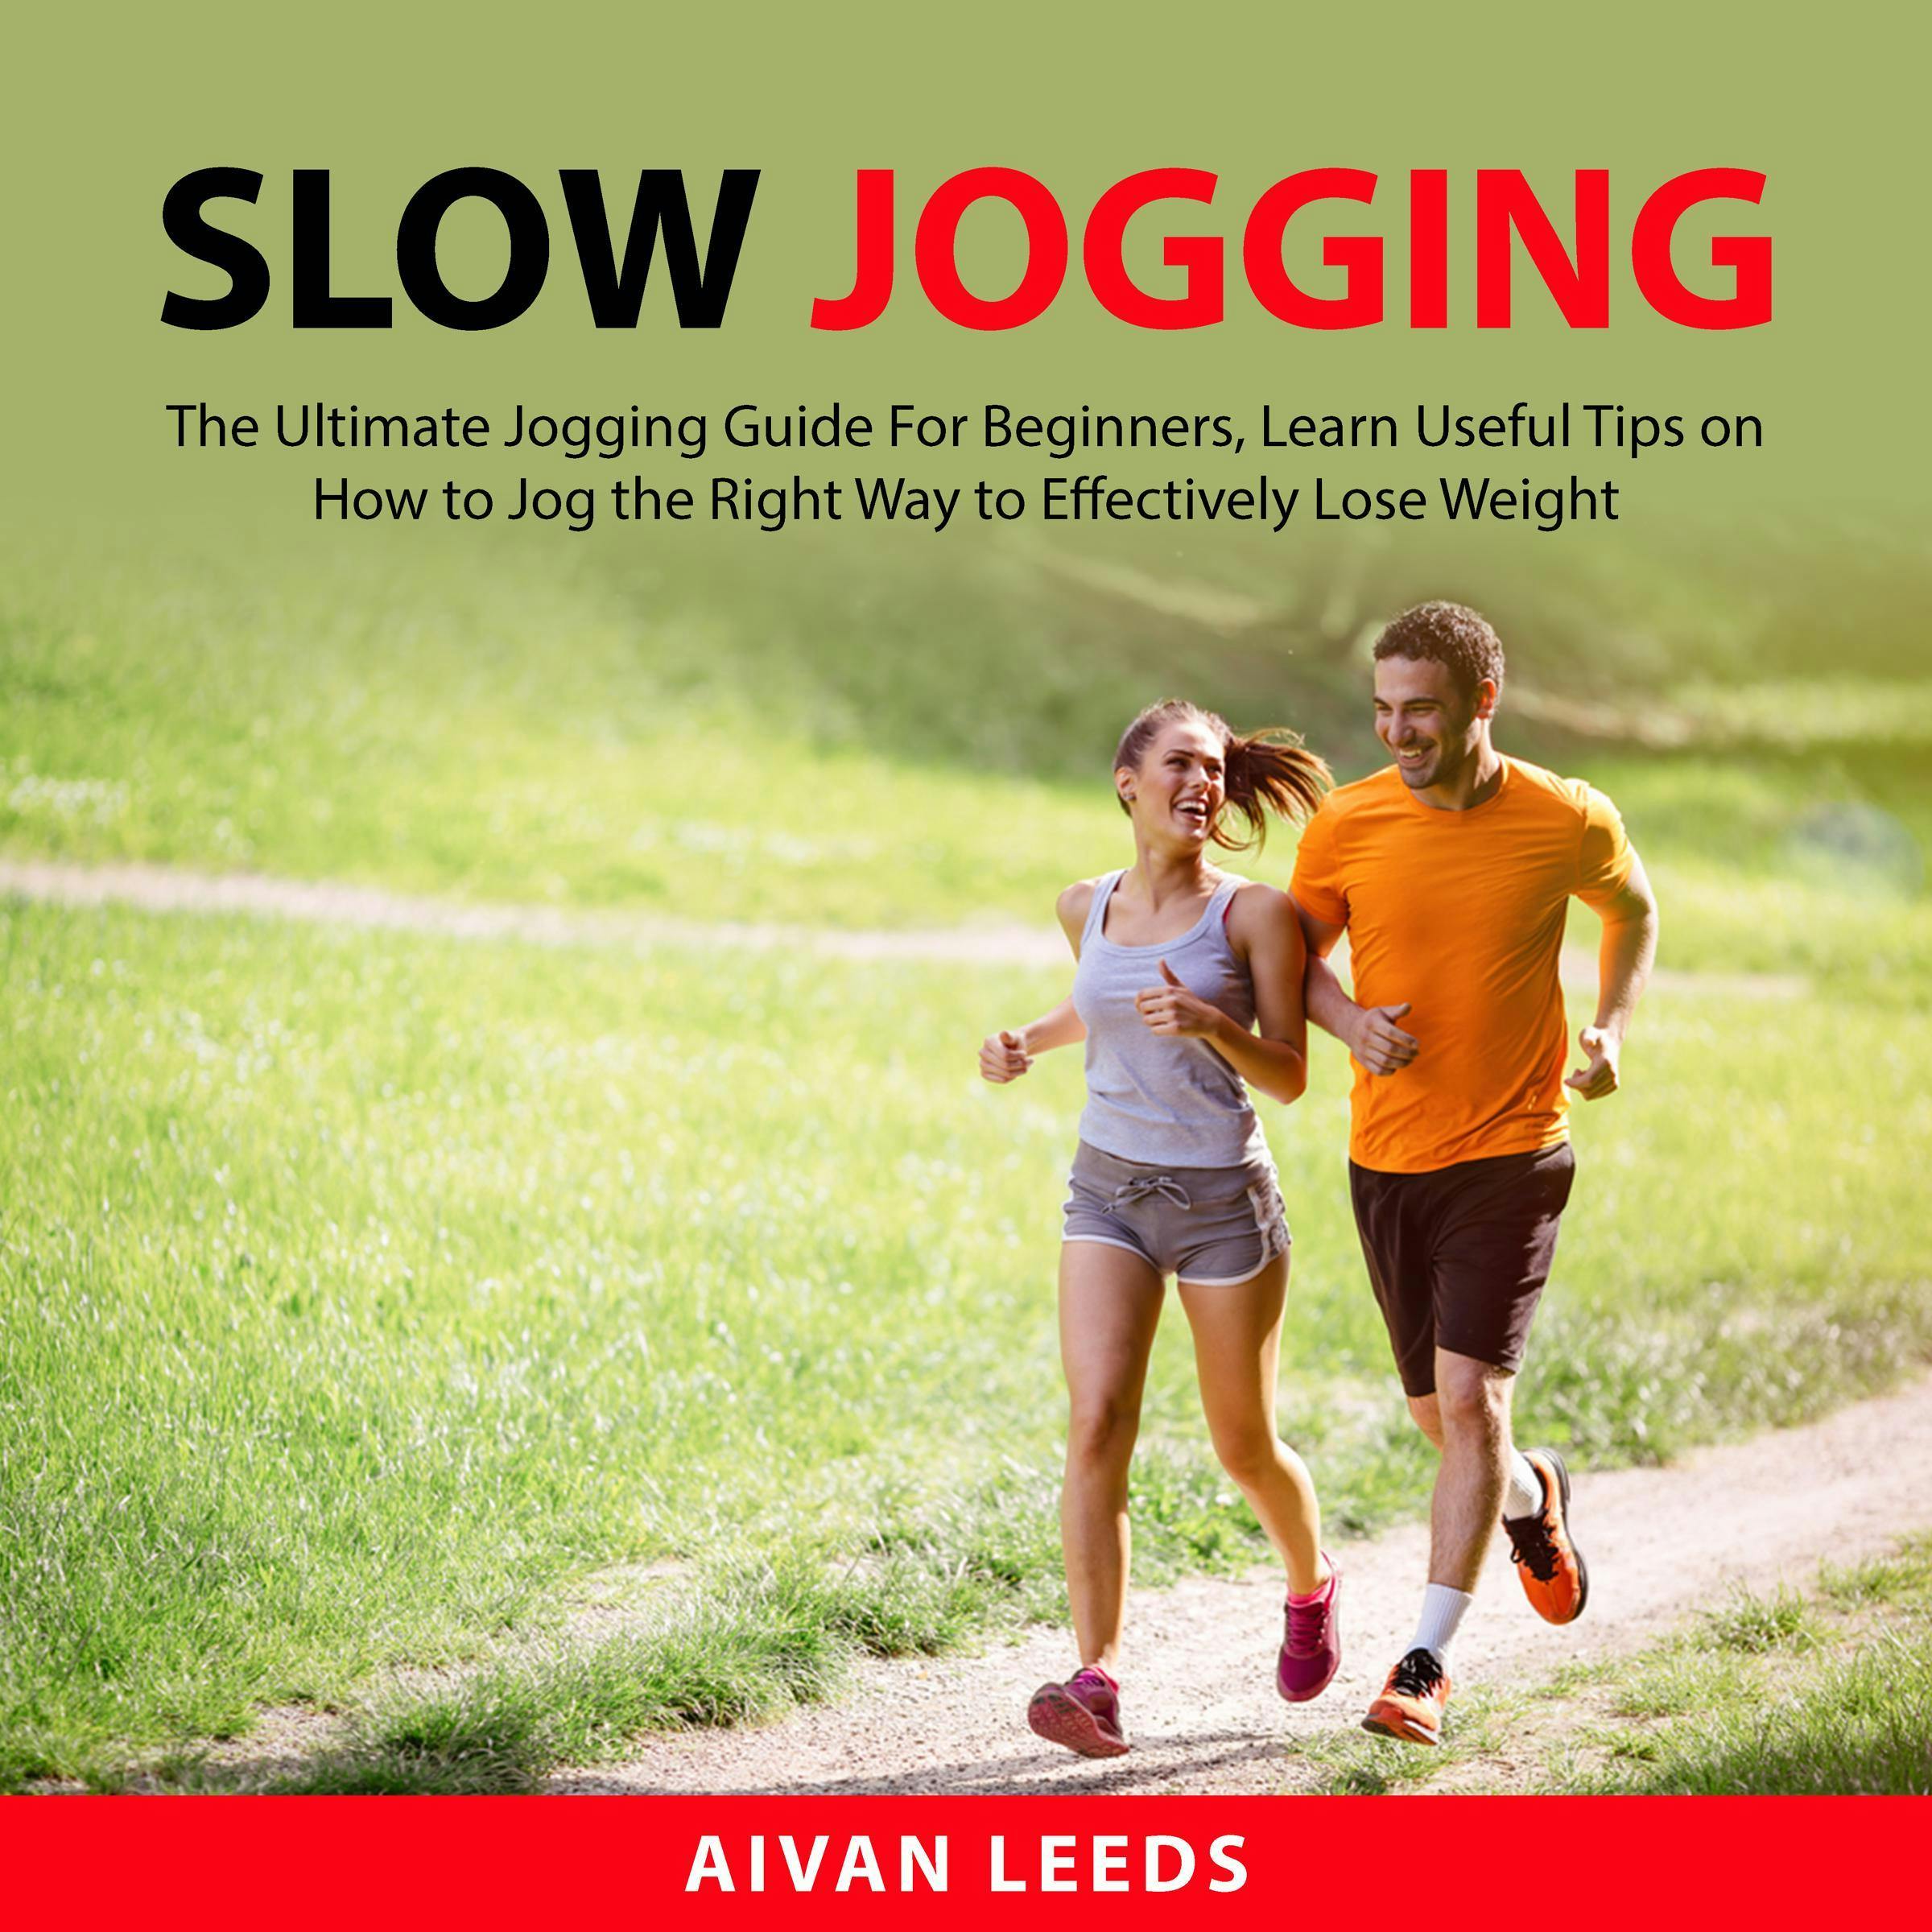 Slow Jogging: The Ultimate Jogging Guide For Beginners, Learn Useful Tips on How to Jog the Right Way to Effectily Lose Weight - Aivan Leeds